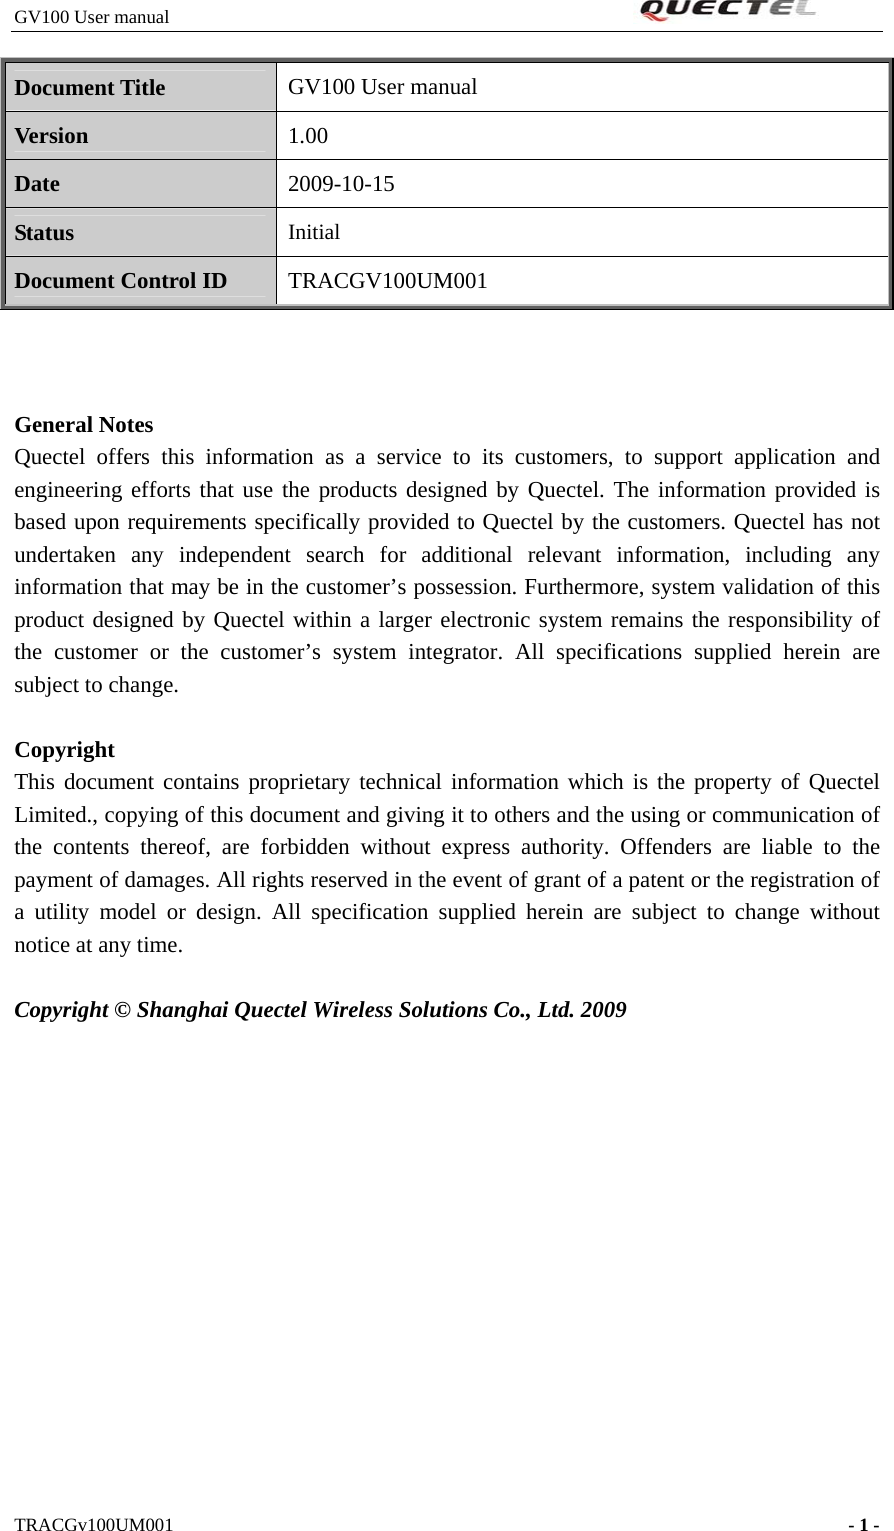 GV100 User manual                                                              Document Title GV100 User manual Version 1.00 Date 2009-10-15 Status Initial Document Control ID TRACGV100UM001    General Notes Quectel offers this information as a service to its customers, to support application and engineering efforts that use the products designed by Quectel. The information provided is based upon requirements specifically provided to Quectel by the customers. Quectel has not undertaken any independent search for additional relevant information, including any information that may be in the customer’s possession. Furthermore, system validation of this product designed by Quectel within a larger electronic system remains the responsibility of the customer or the customer’s system integrator. All specifications supplied herein are subject to change.  Copyright This document contains proprietary technical information which is the property of Quectel Limited., copying of this document and giving it to others and the using or communication of the contents thereof, are forbidden without express authority. Offenders are liable to the payment of damages. All rights reserved in the event of grant of a patent or the registration of a utility model or design. All specification supplied herein are subject to change without notice at any time.  Copyright © Shanghai Quectel Wireless Solutions Co., Ltd. 2009           TRACGv100UM001                                                                    - 1 -   